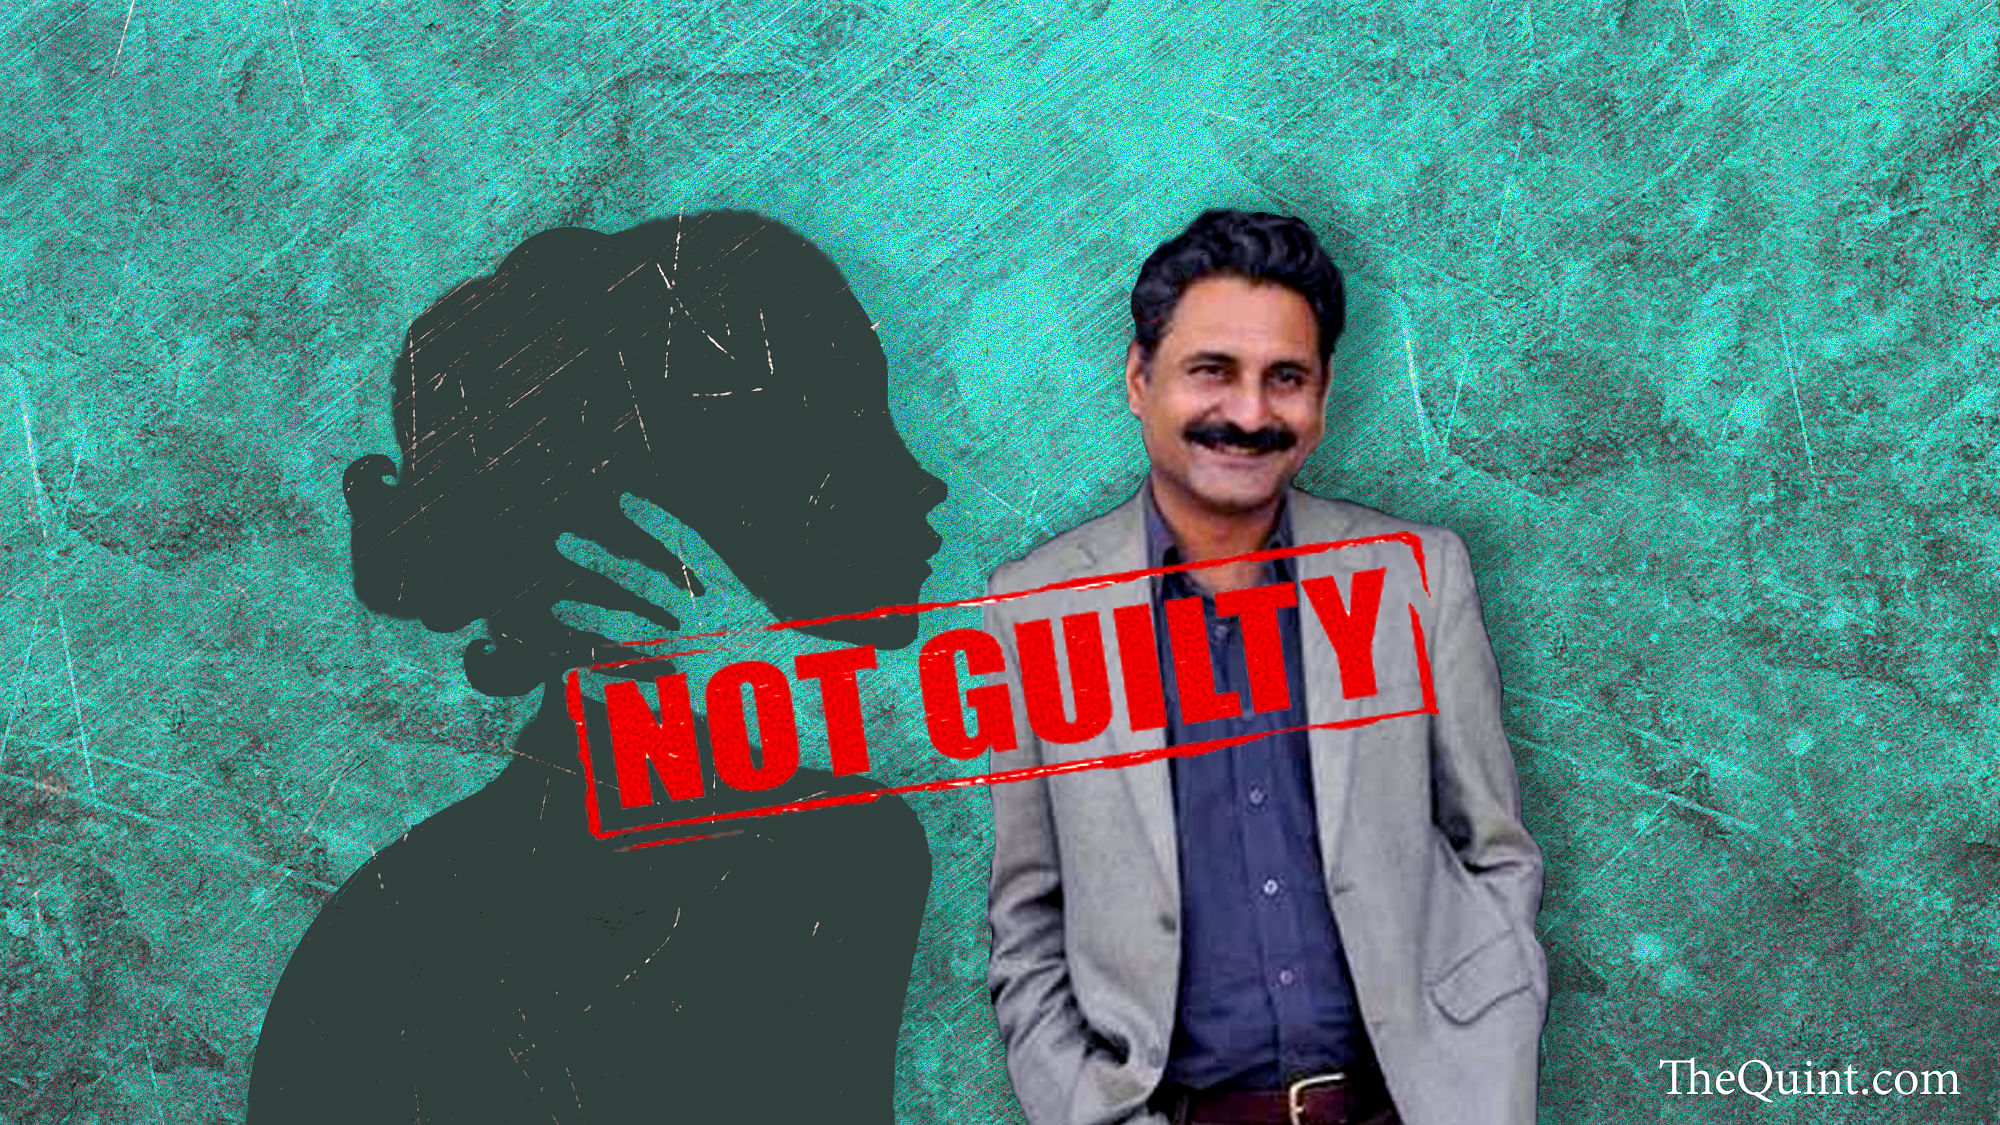 Farooqui was arrested in June 2015 after a US-based research scholar accused him of sexual assault in March 2015.